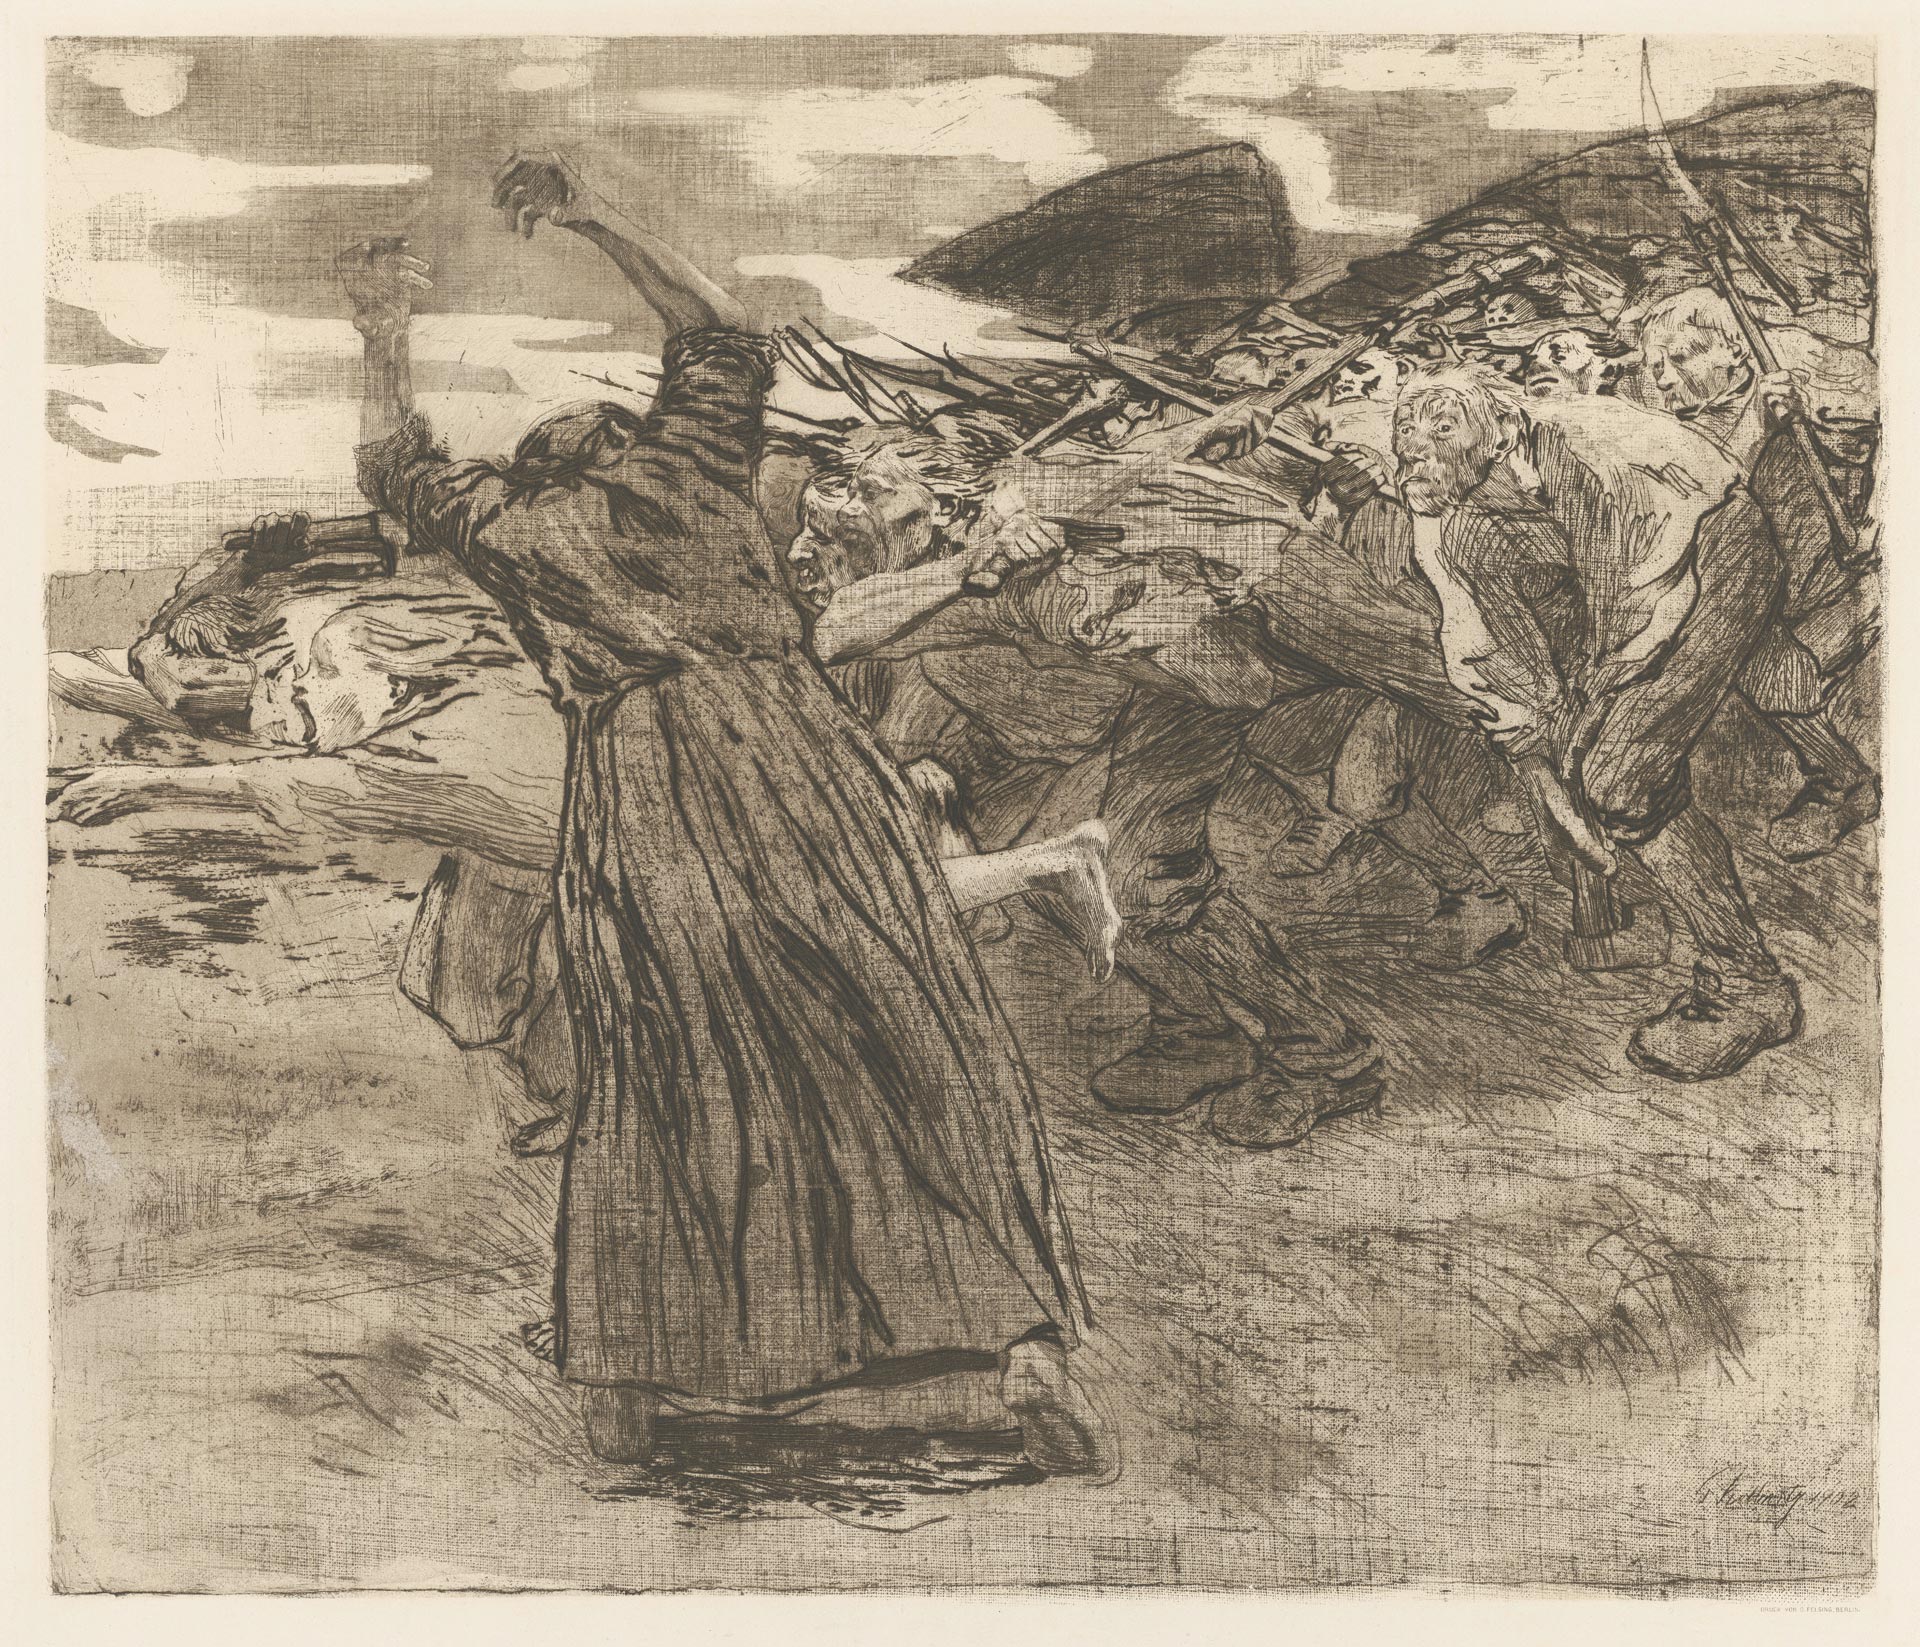 Käthe Kollwitz, Charge, sheet 5 of the cycle »Peasants War«, 1902/1903, line etching, drypoint, reservage and soft ground with imprint of two fabrics and Ziegler's transfer paper, Kn 70 VIII b, Cologne Kollwitz Collection © Käthe Kollwitz Museum Köln